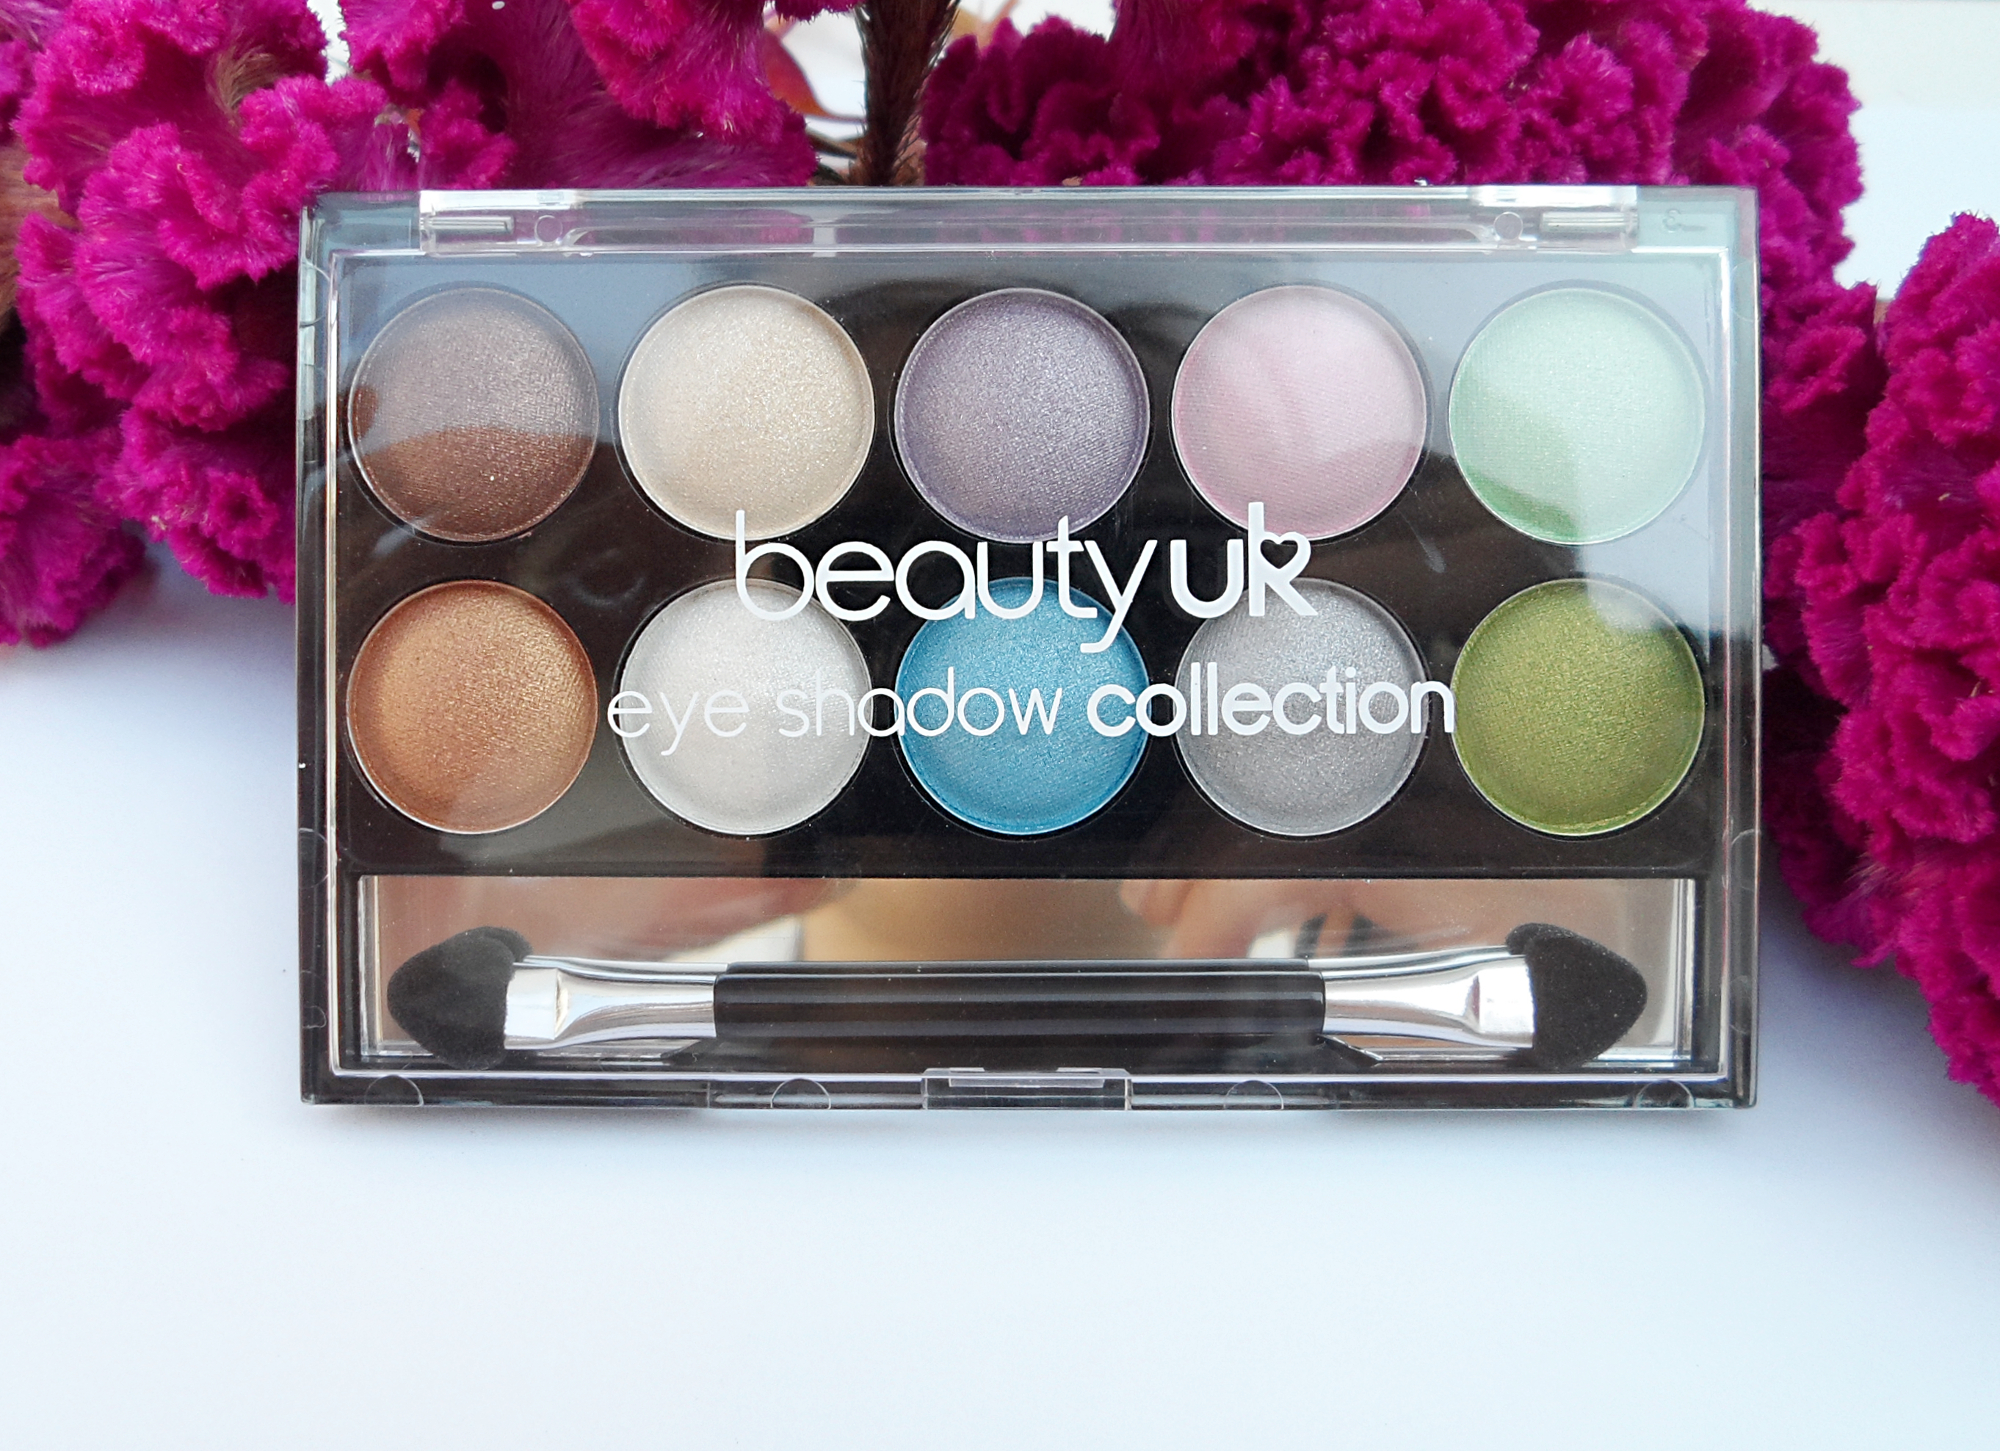 pastel eyeshadows palette by makeup brand beauty uk review, swatches, and pictures by blogger